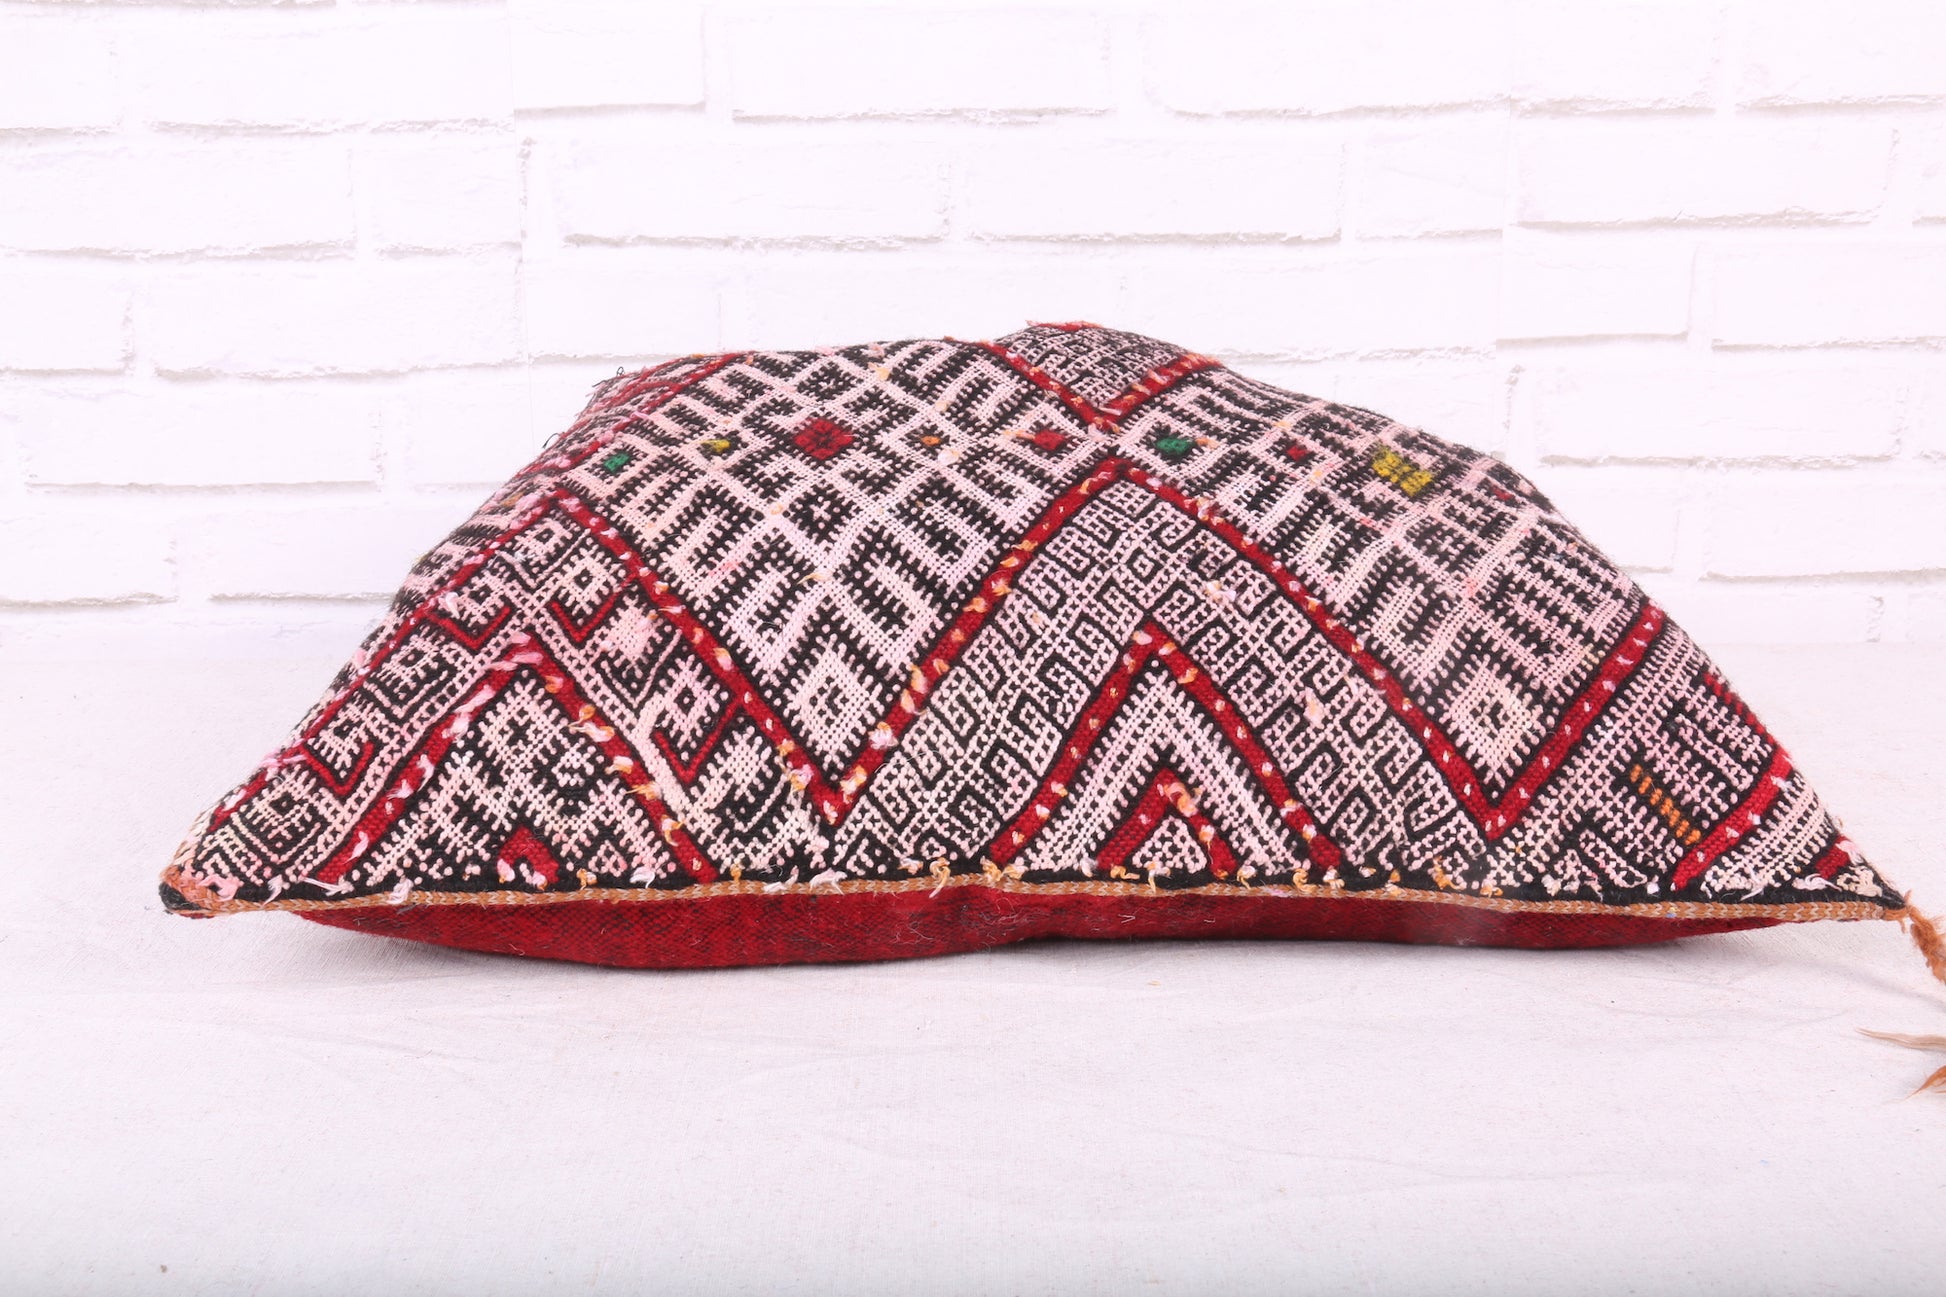 Berber cushion # Coussin kilim brodé REF B1 with filling type Cushions  kilim with embroidery 90cm x 50cm.